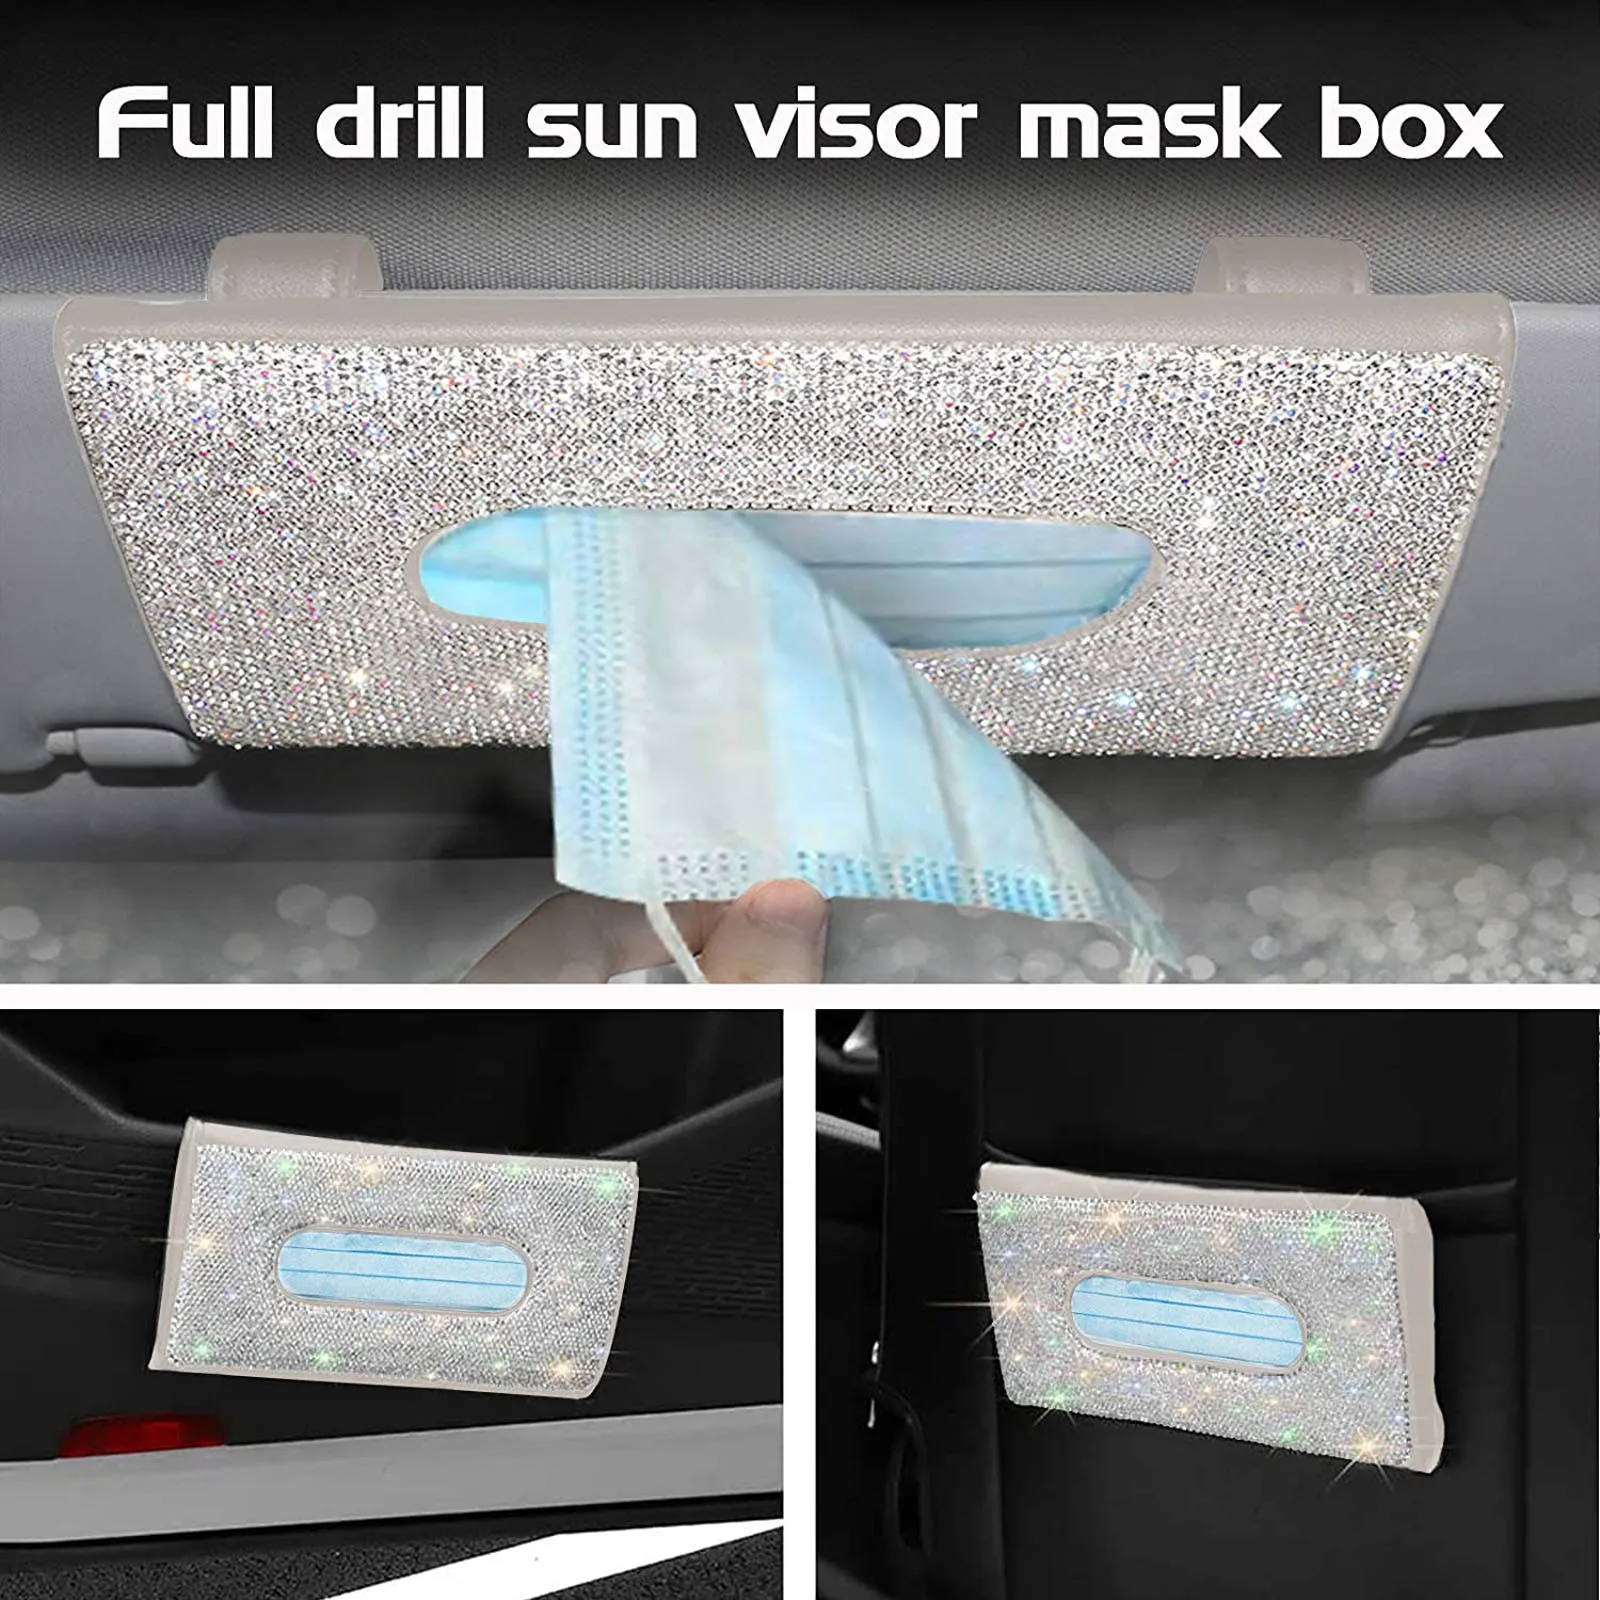 

Disposable Mask Case Container Visor Mask Holder Box Diamond Encrusted For Car Efillable With Up To (20) 3-ply Organizer